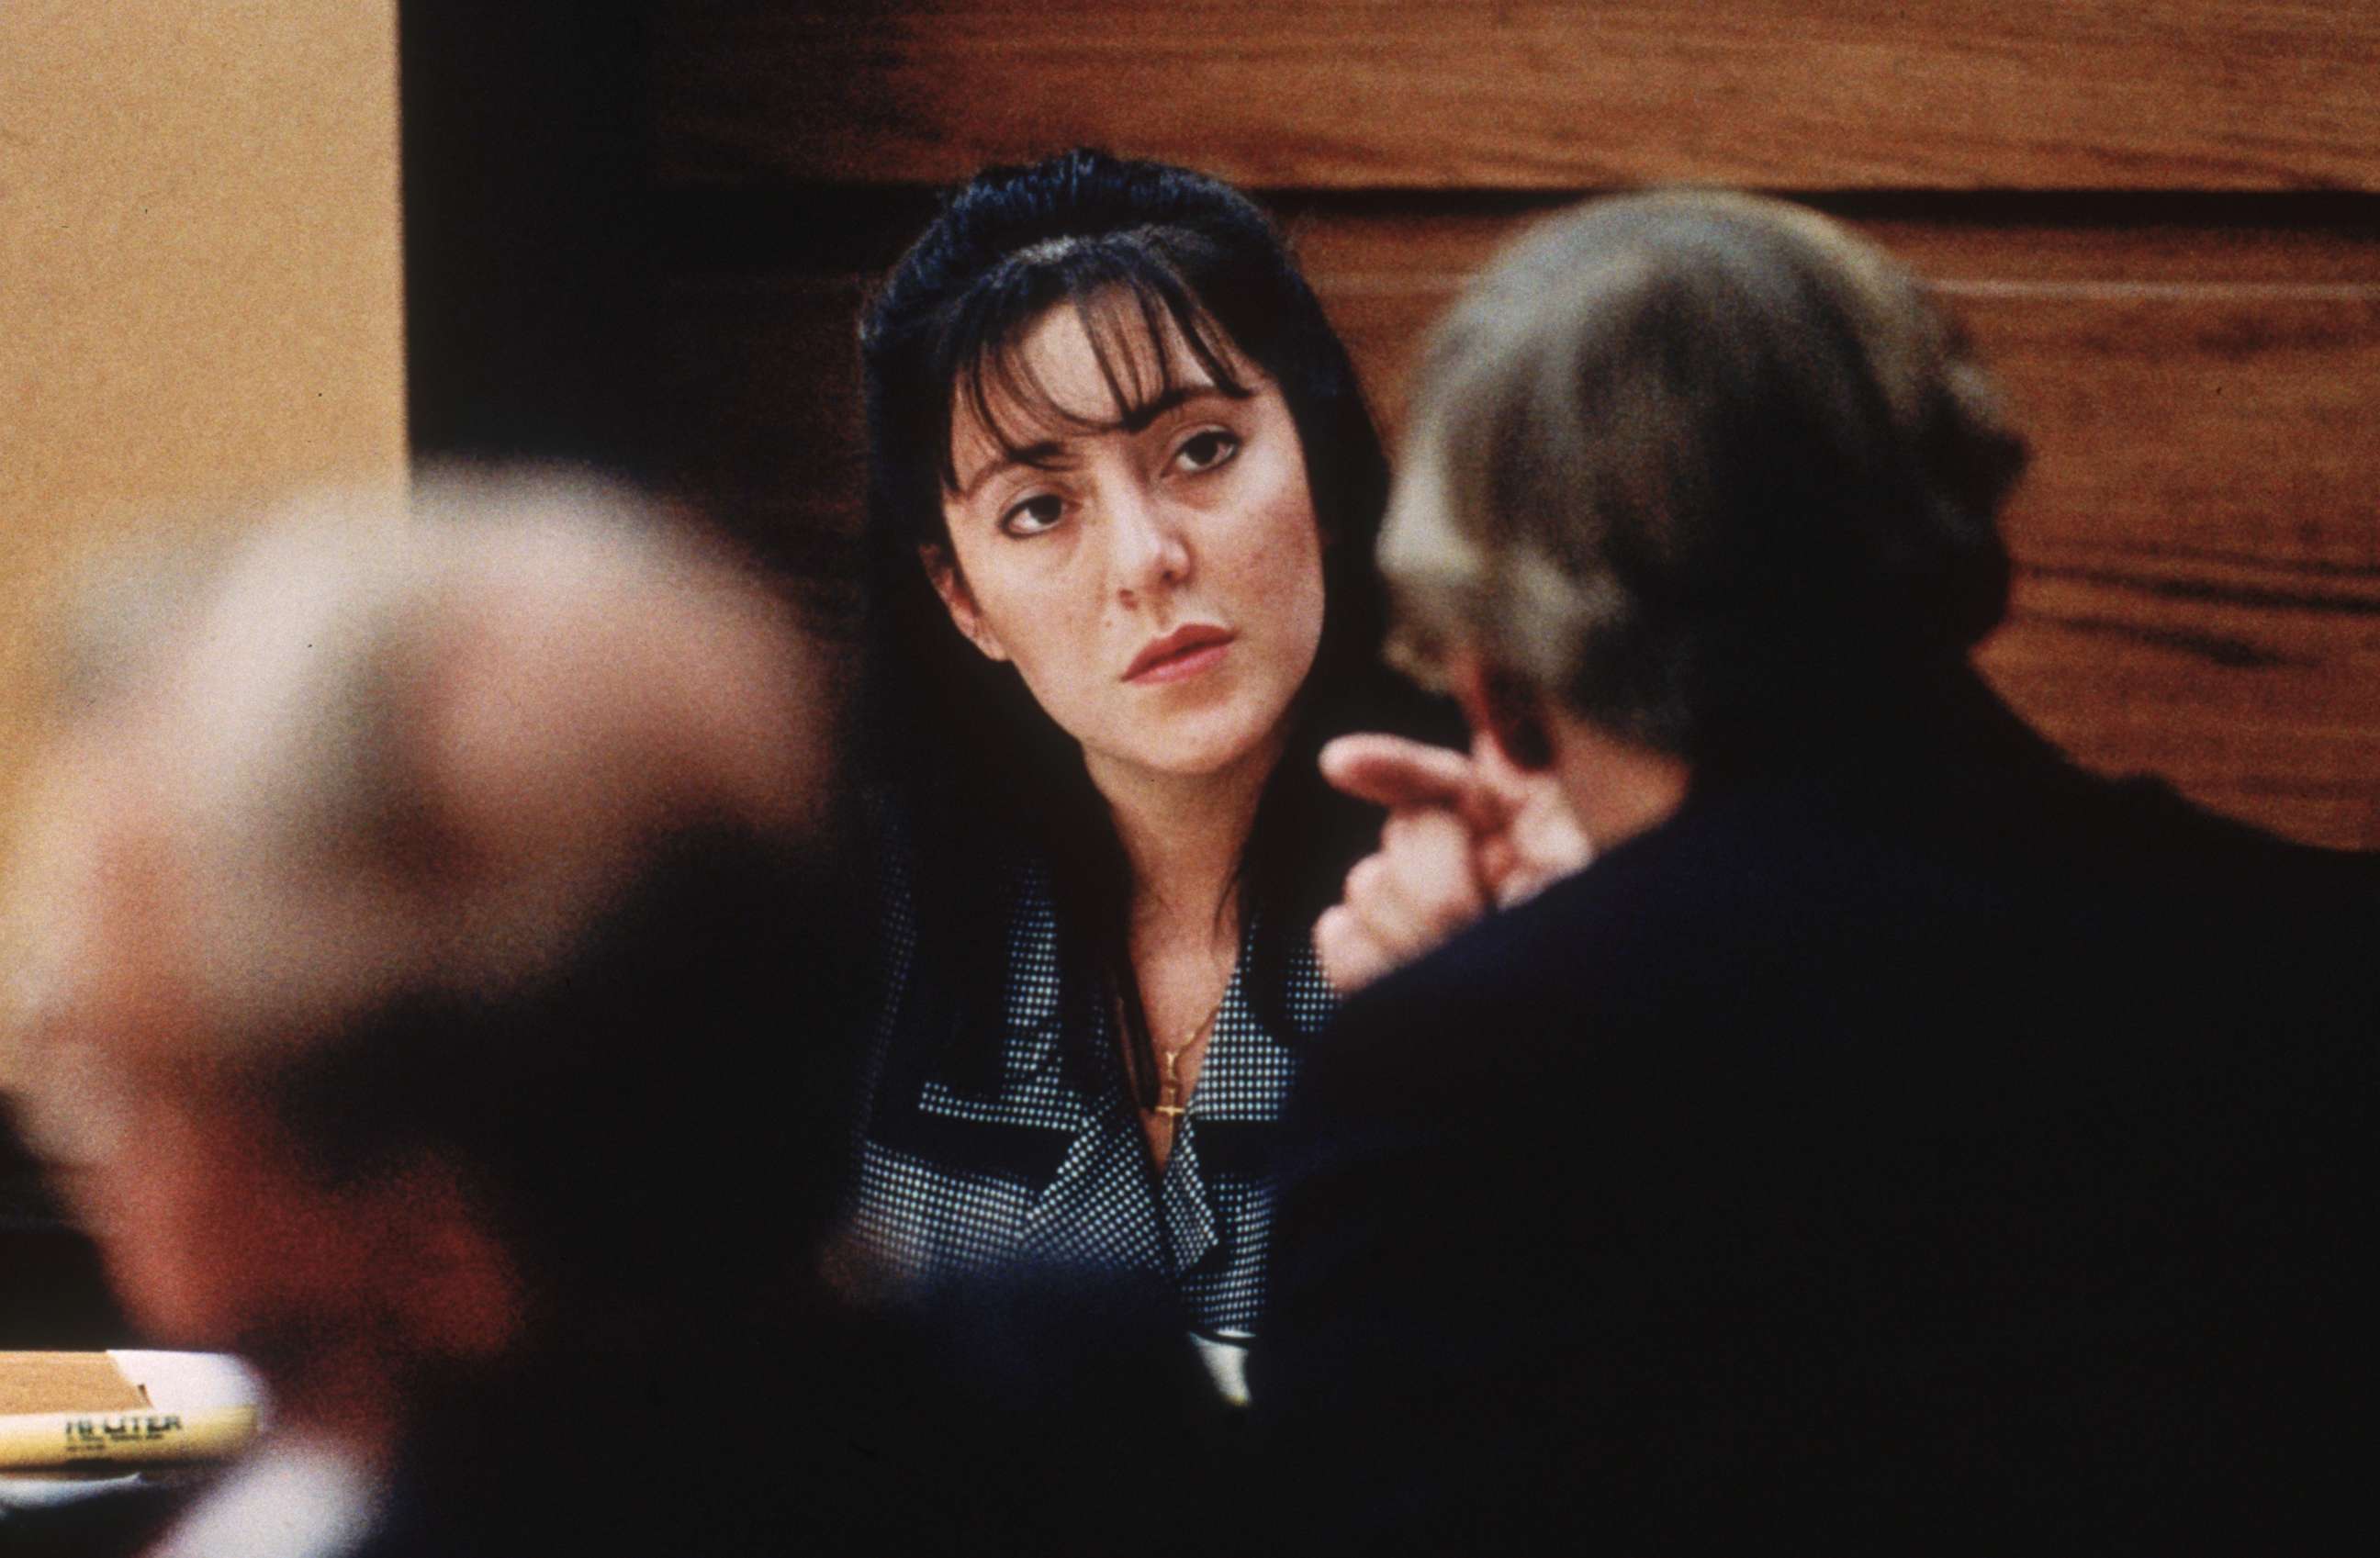 PHOTO: Lorena Bobbitt takes the witness stand in her trial for cutting off her husband's penis Jan. 1994.